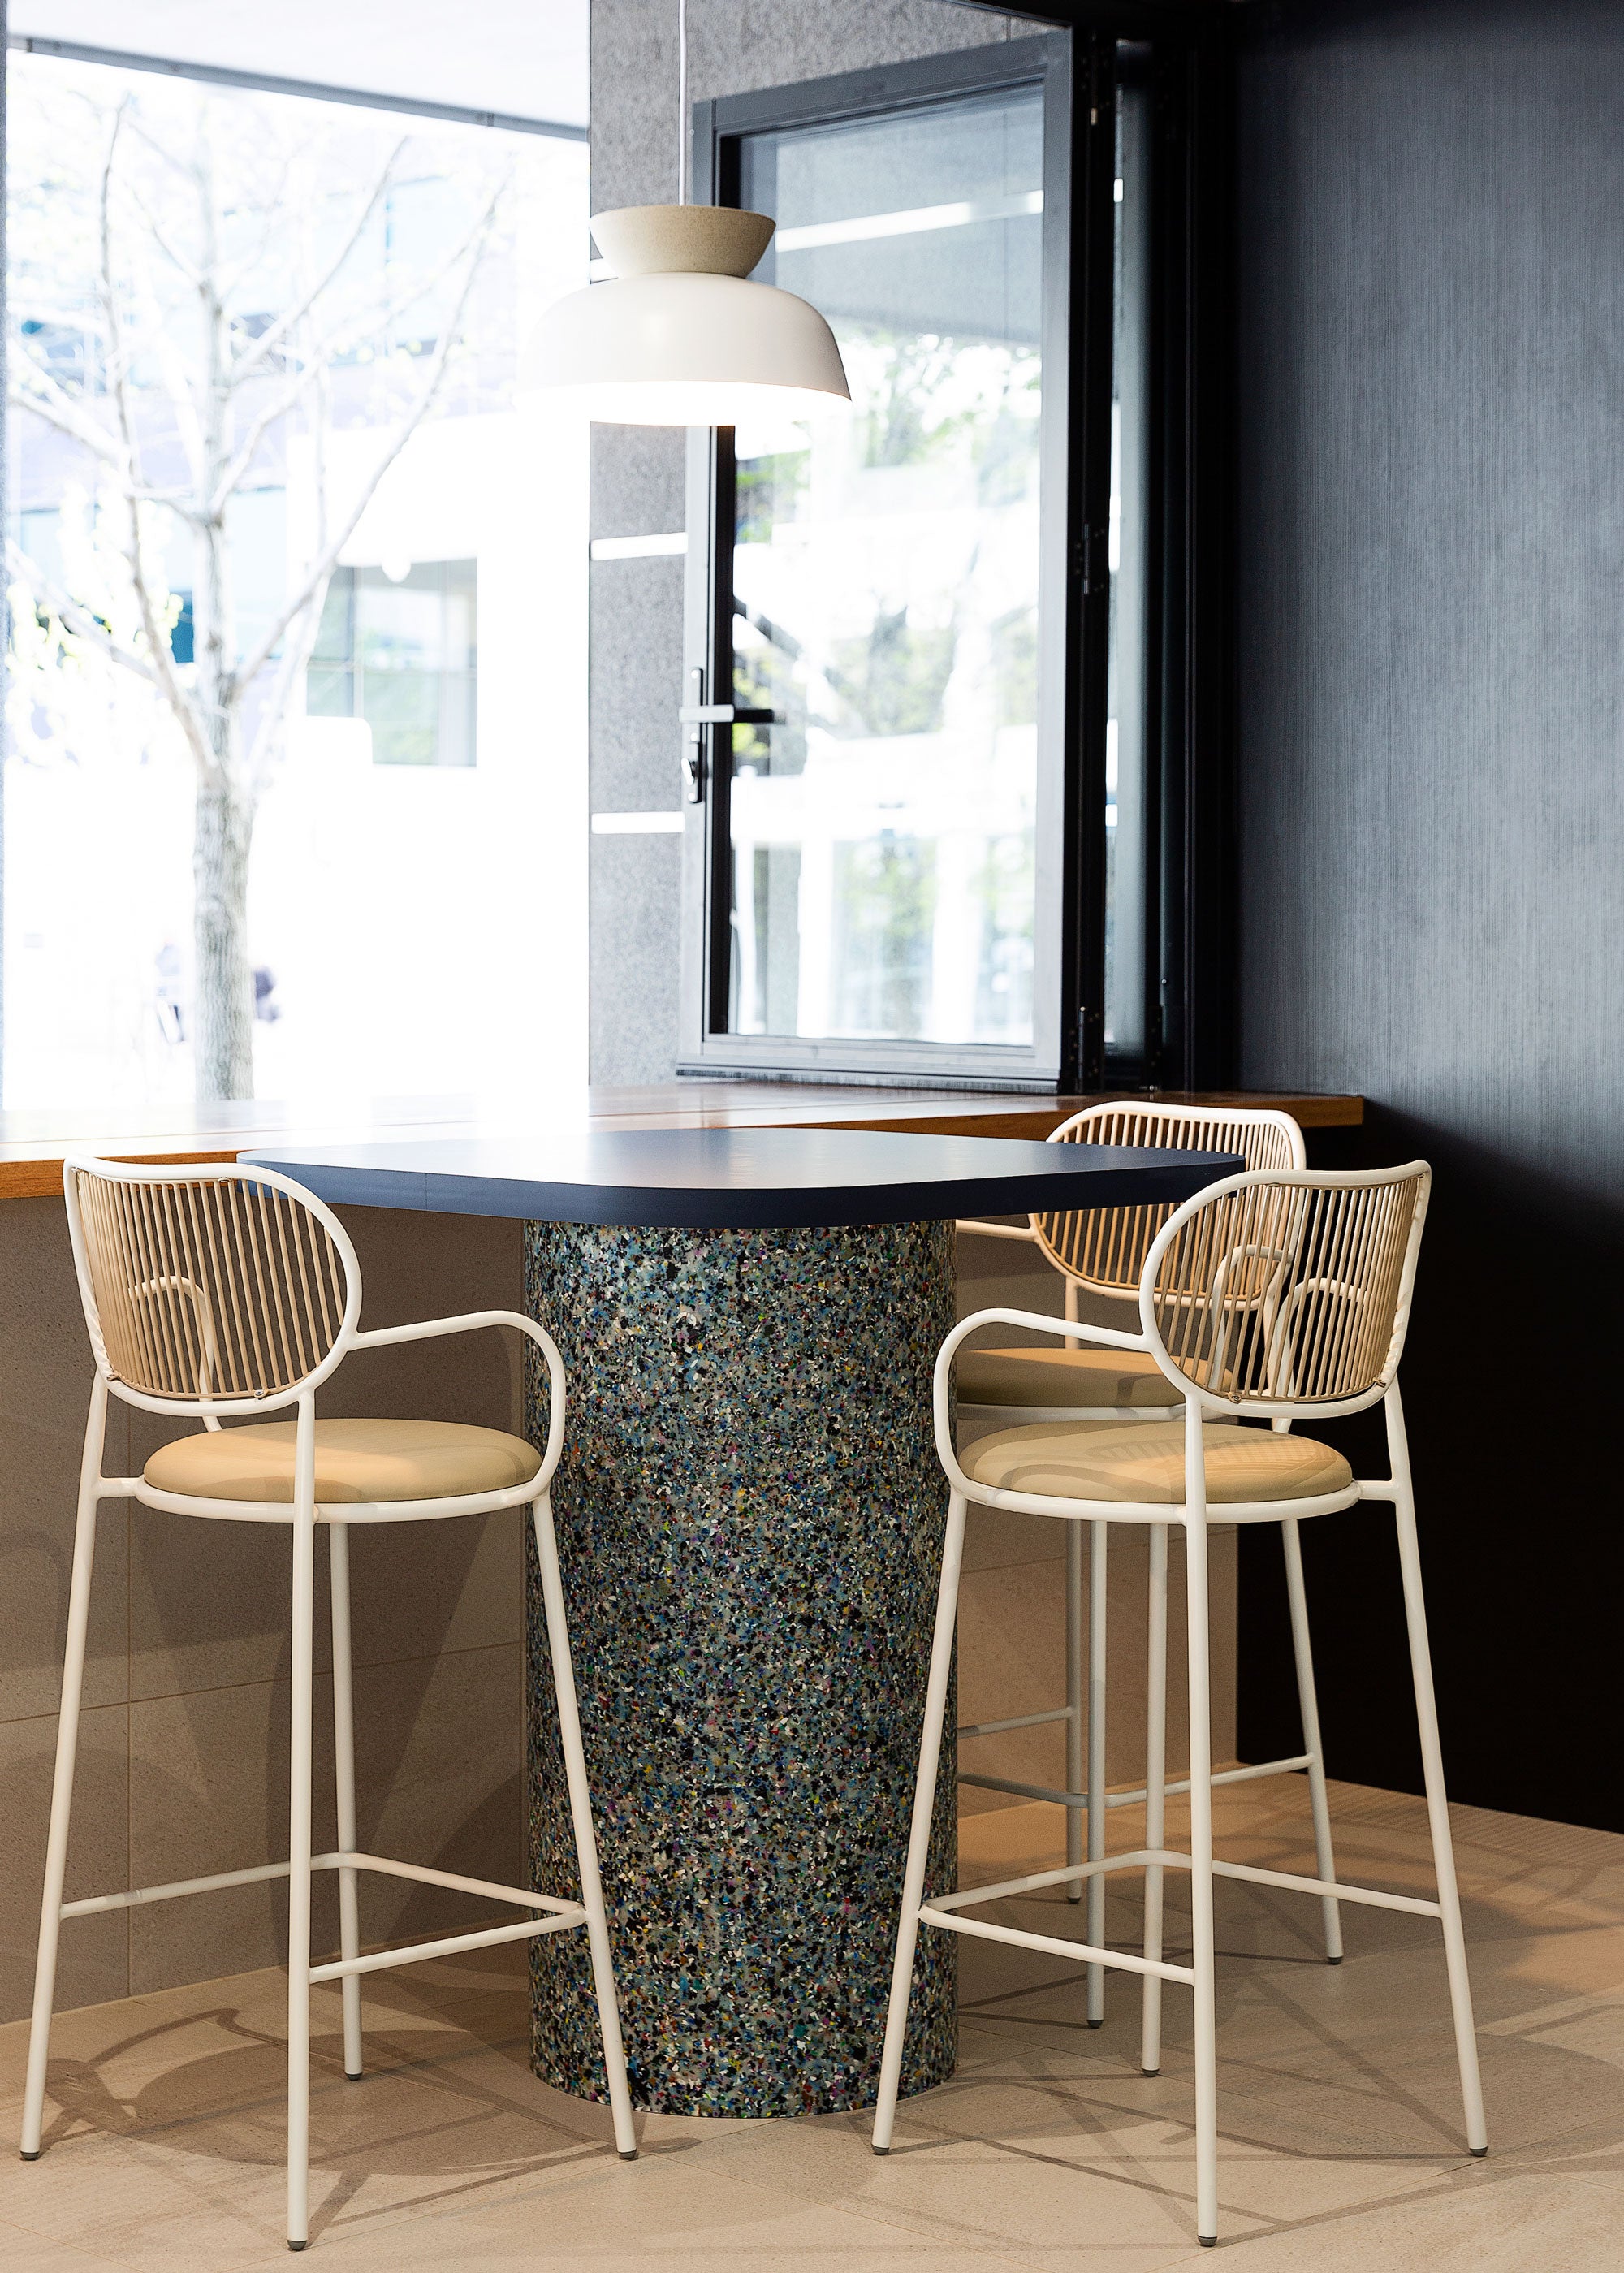 Piper, Bobby and Confetti at 11 Moore St by Davenport Campbell and Intermain | DesignByThem Furniture